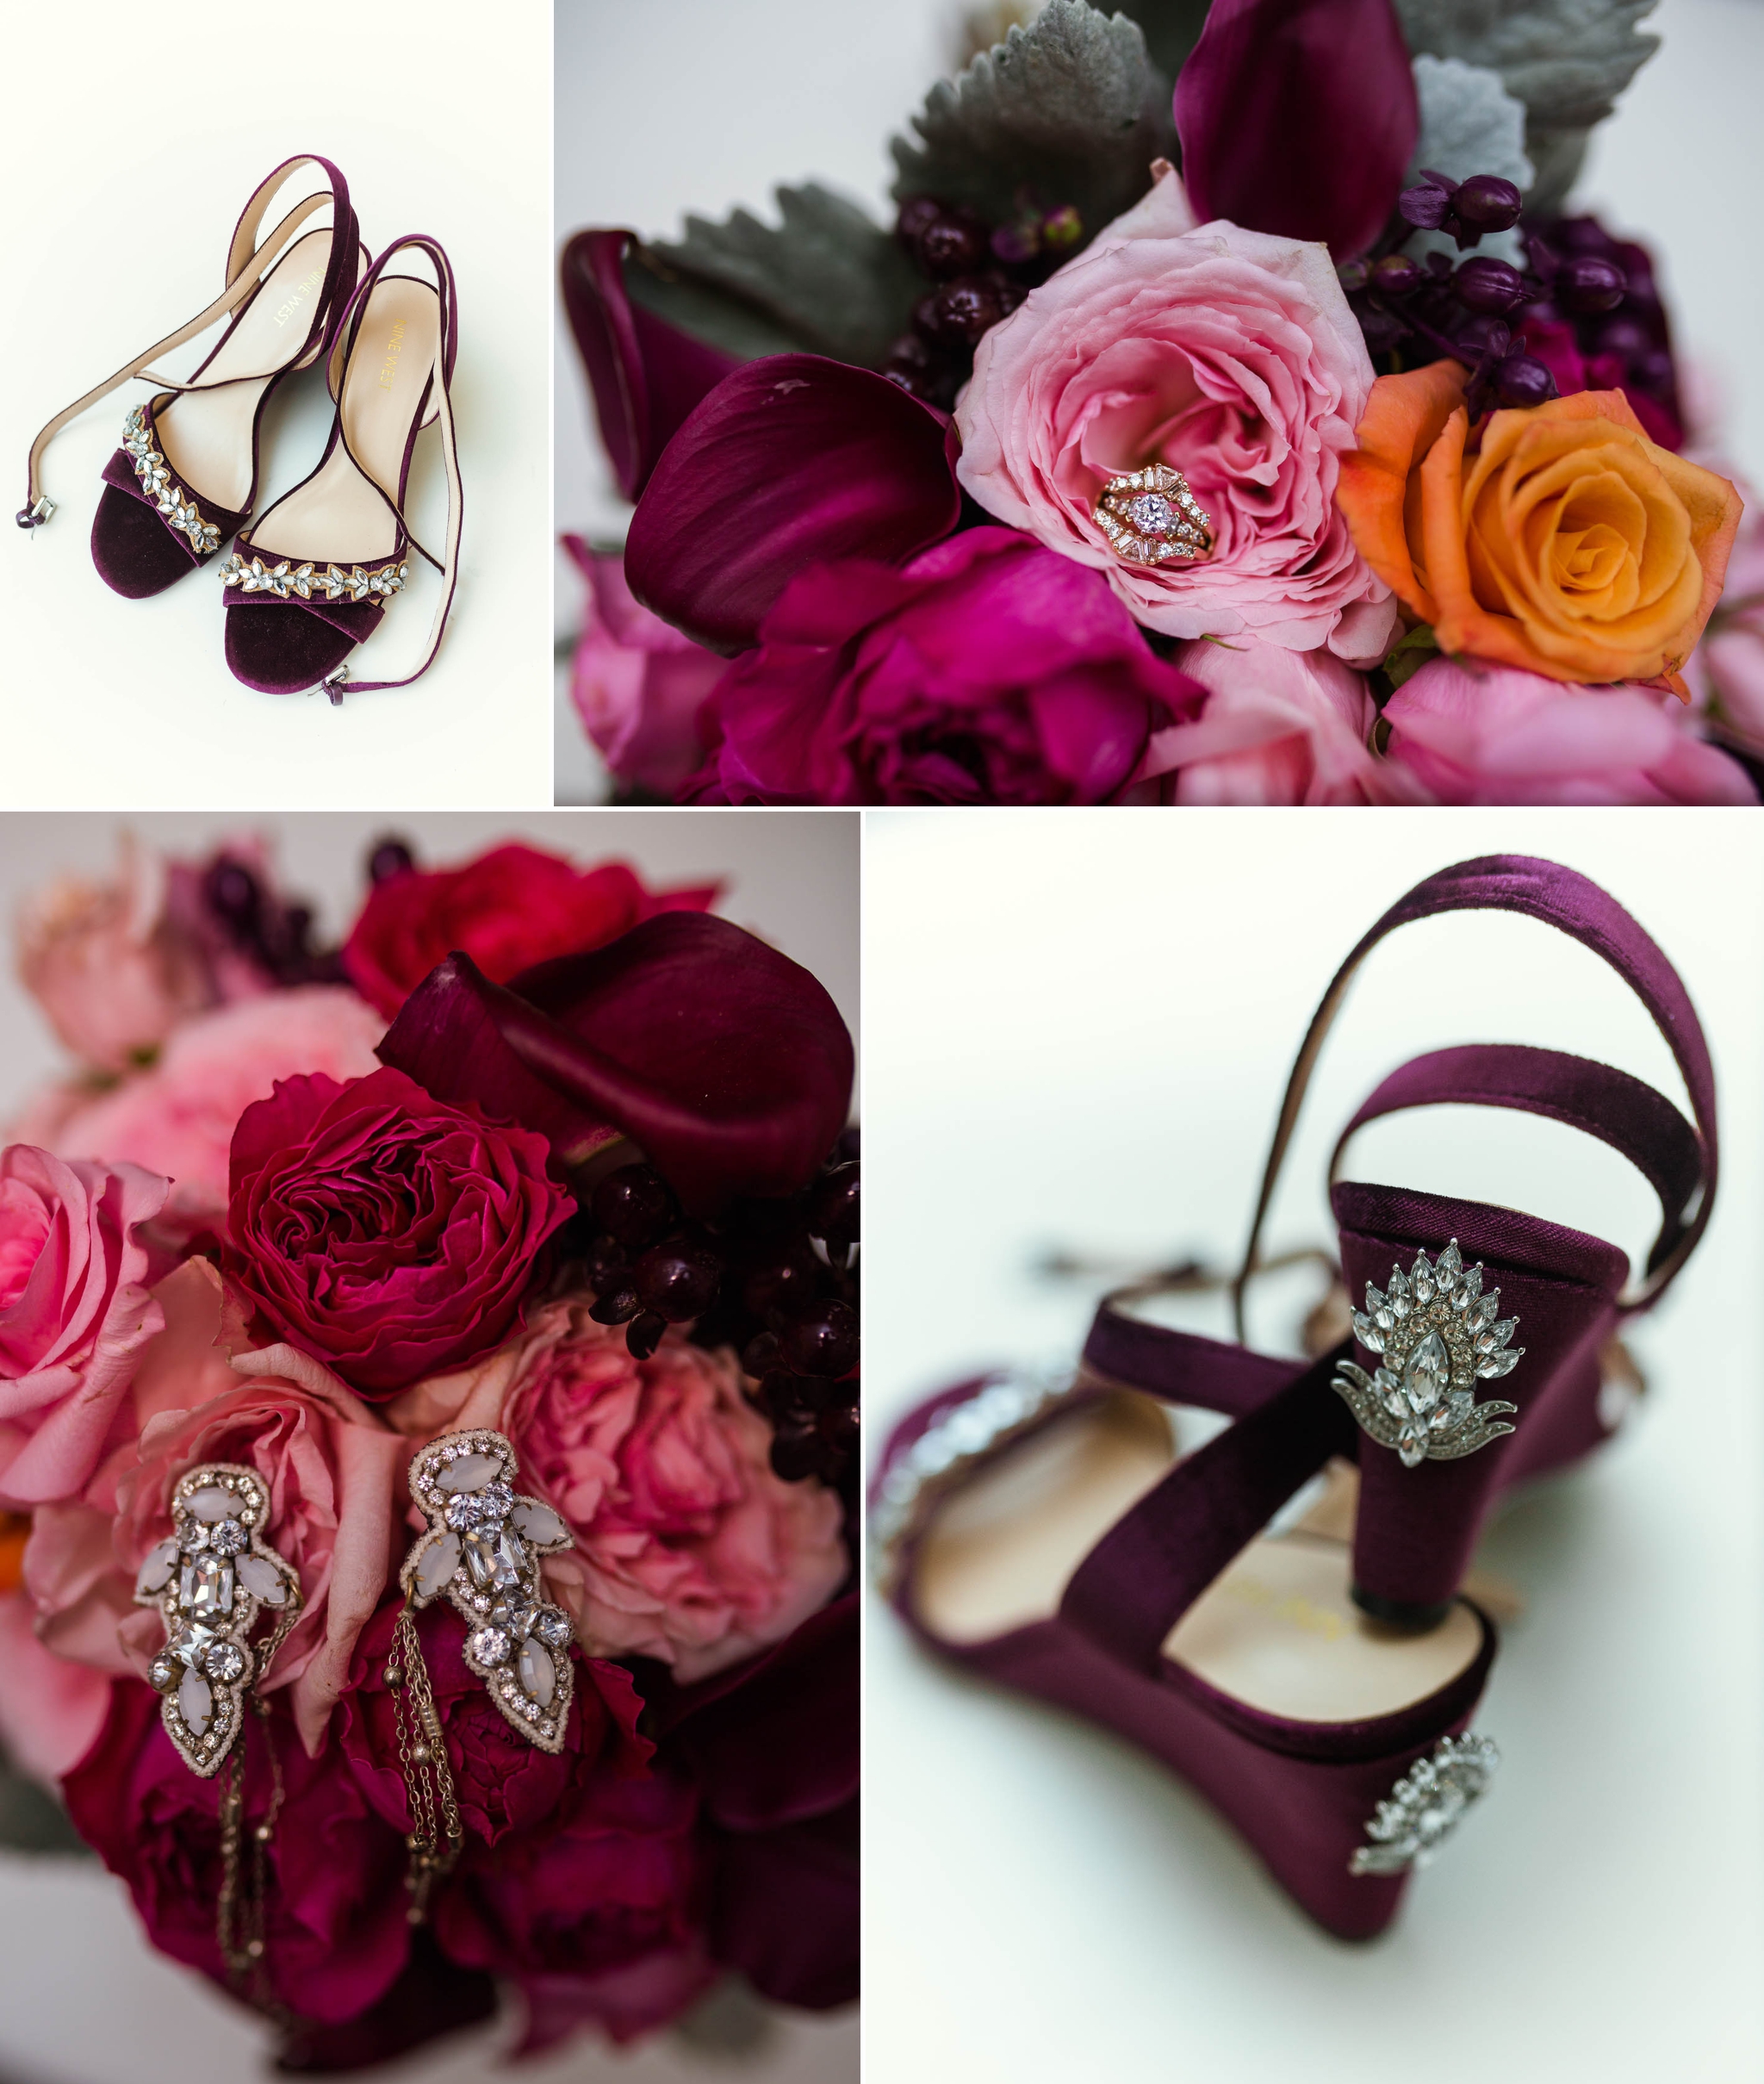 Bridal Details, Engagement Ring and Shoes - Brittany + Jonathan - Raleigh North Carolina Wedding Photographer